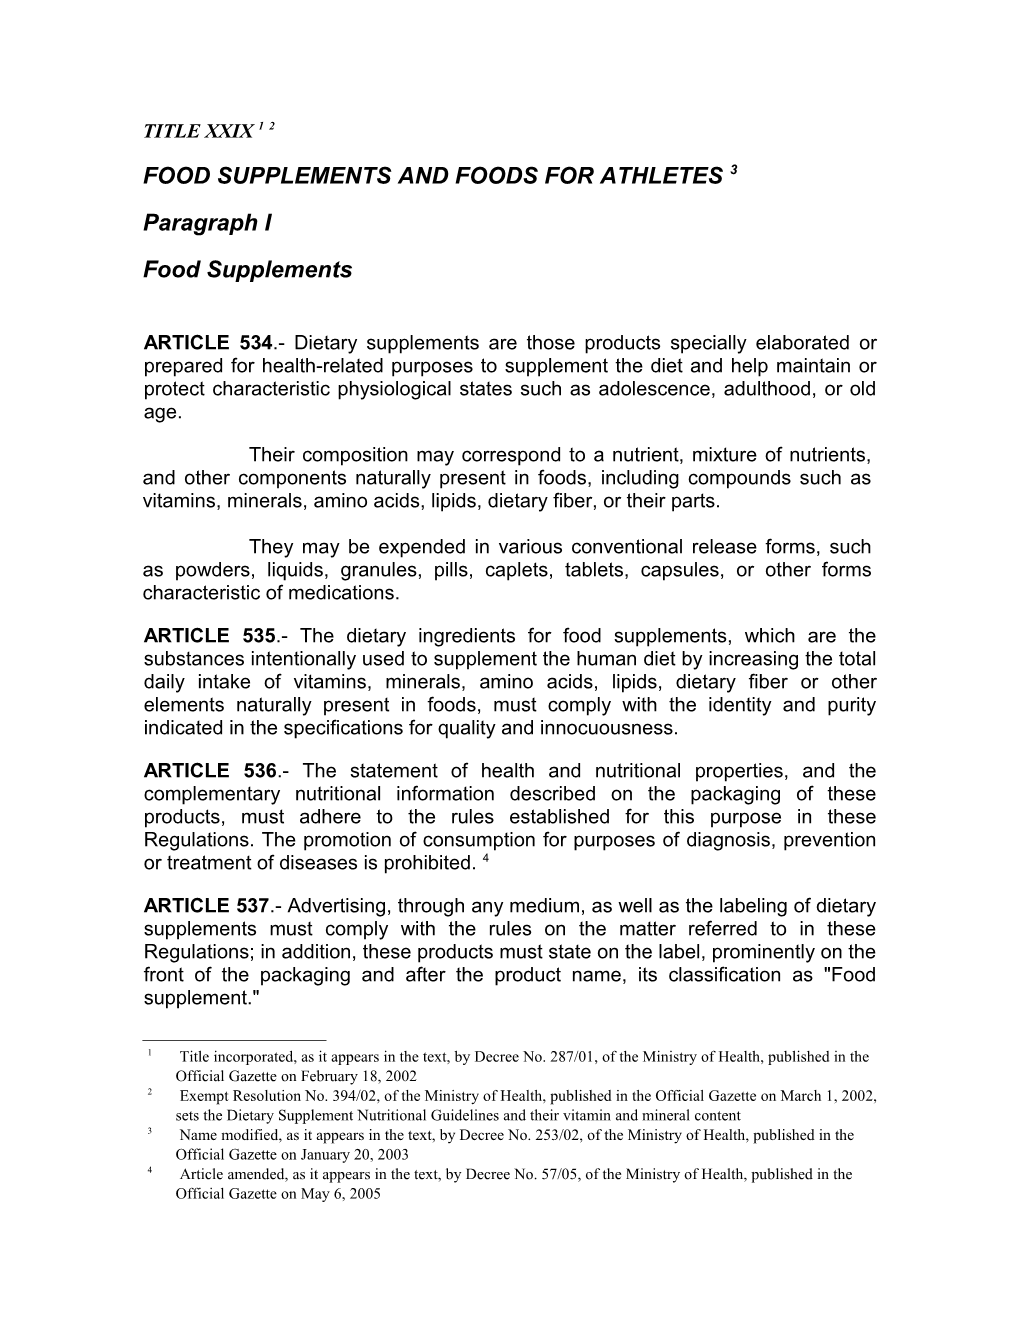 Food Supplements and Foods for Athletes 3